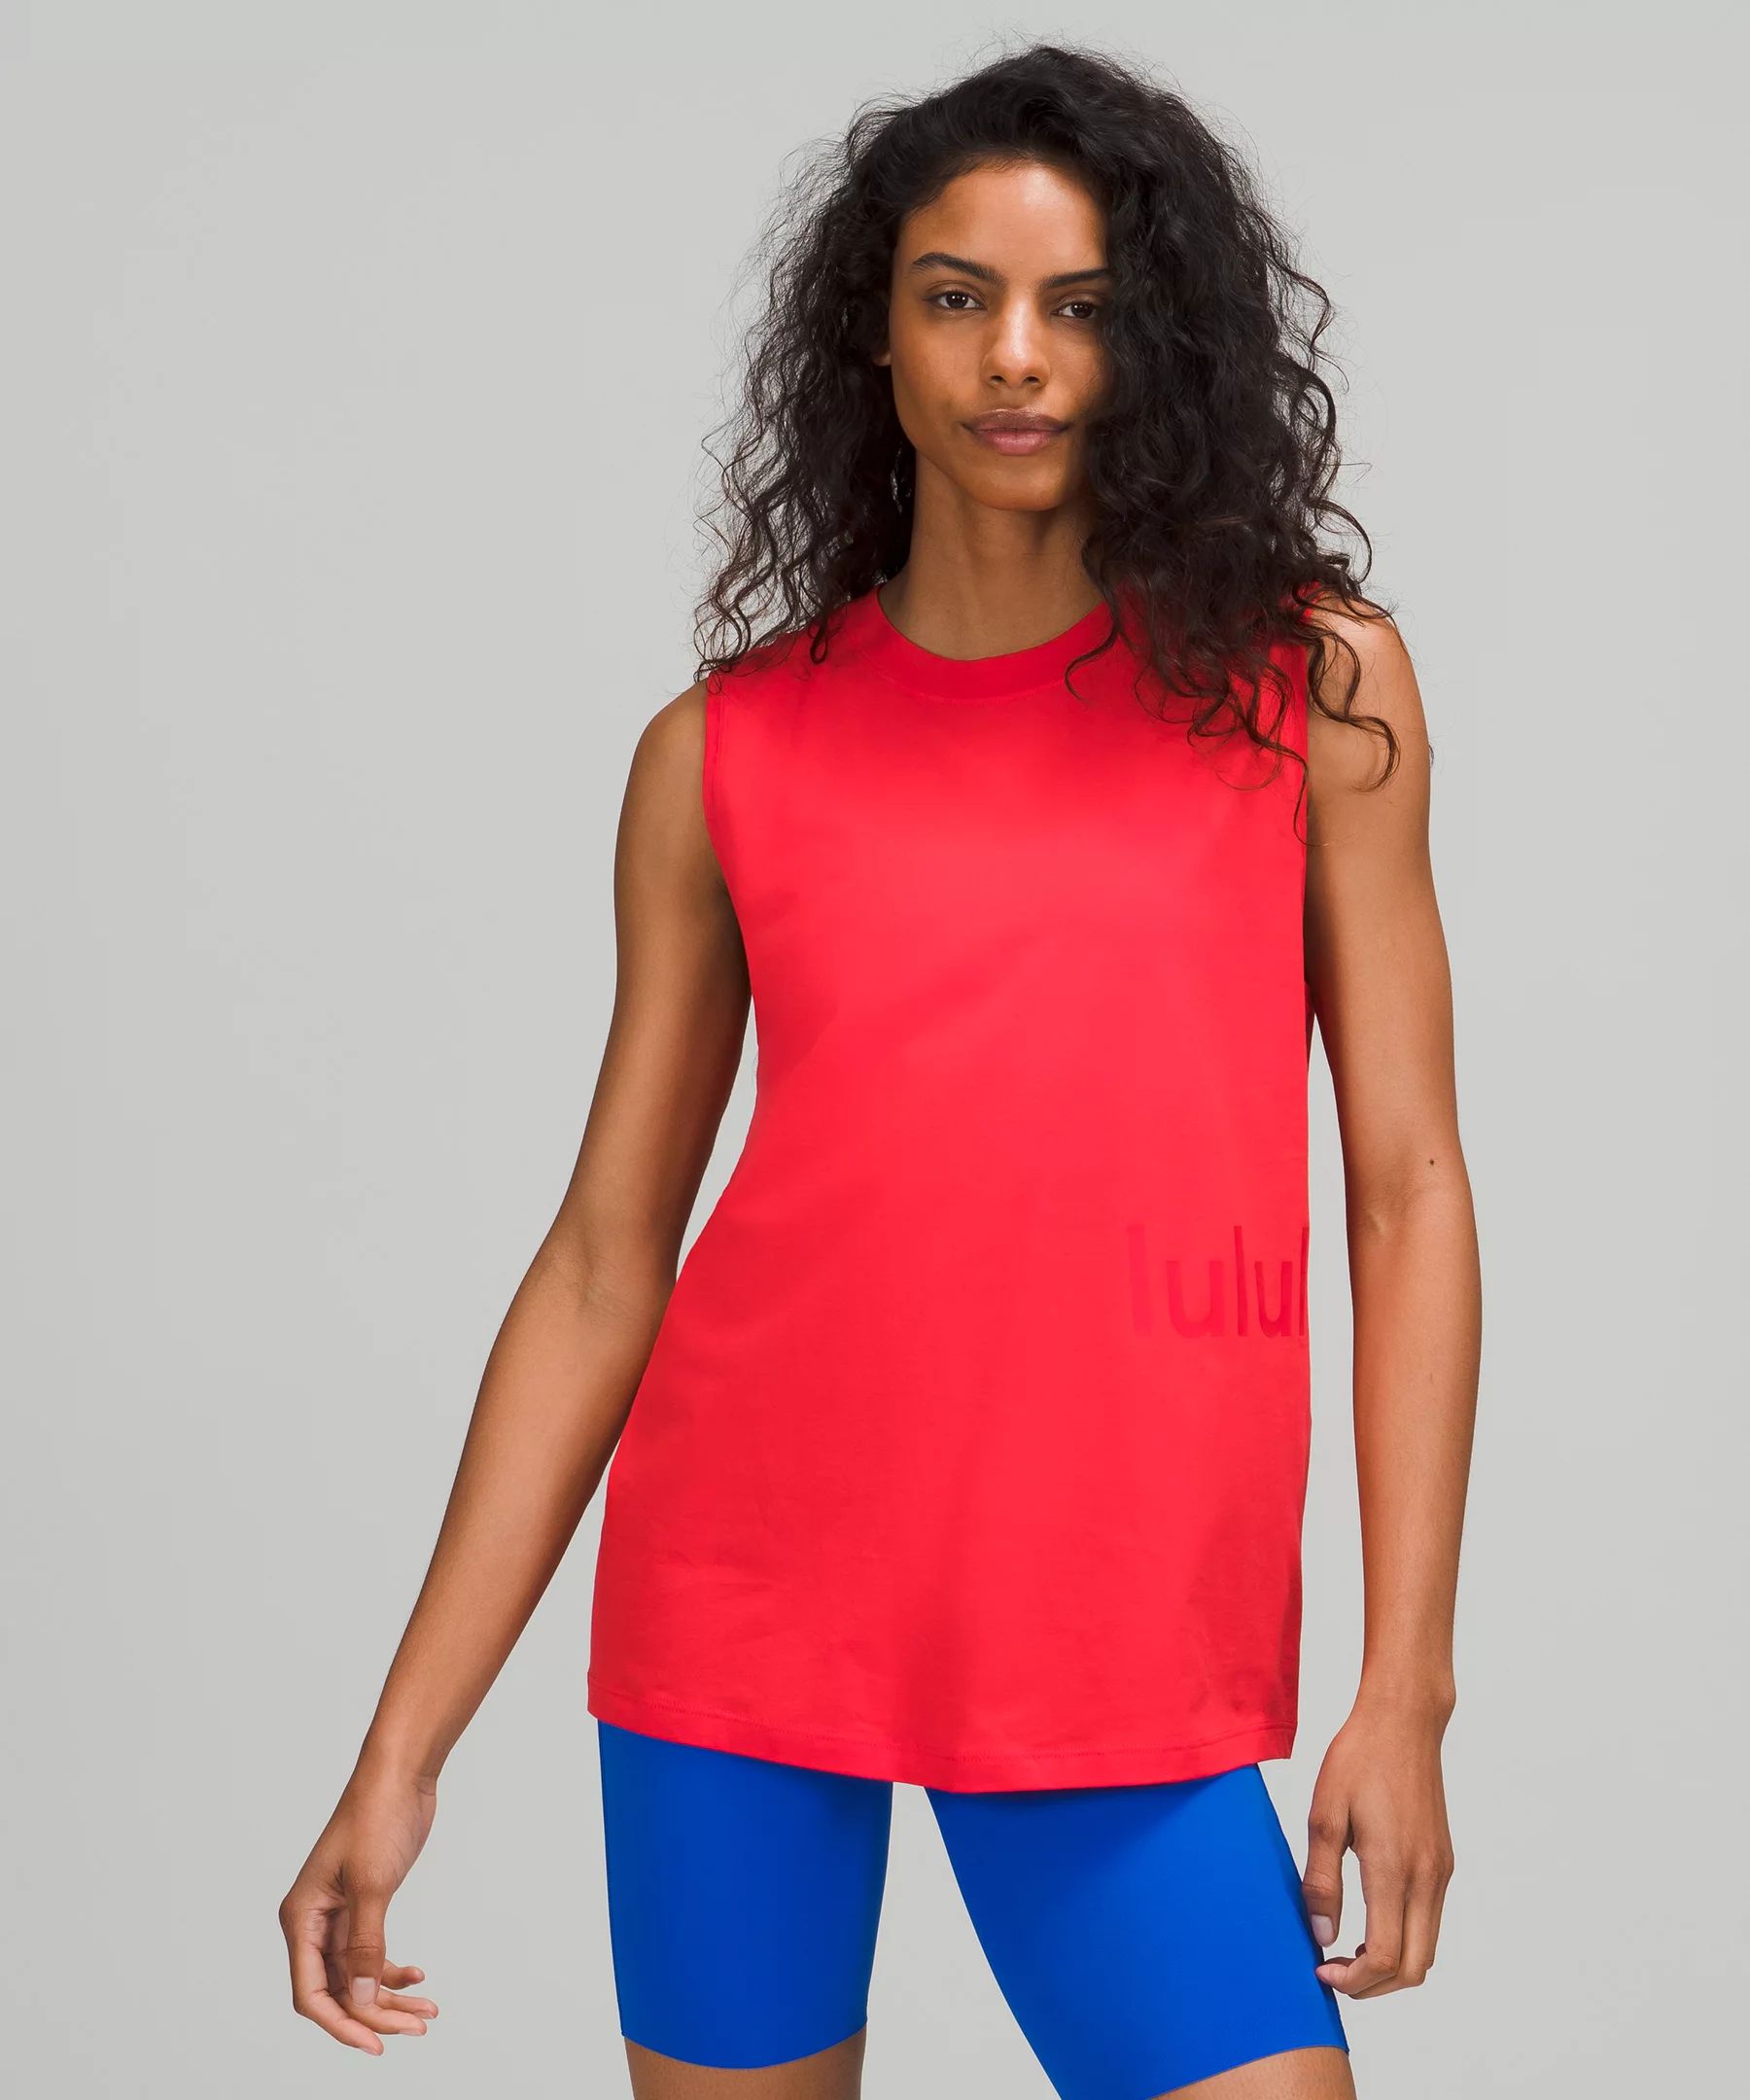 All Yours Tank Top Graphic | Lululemon (US)